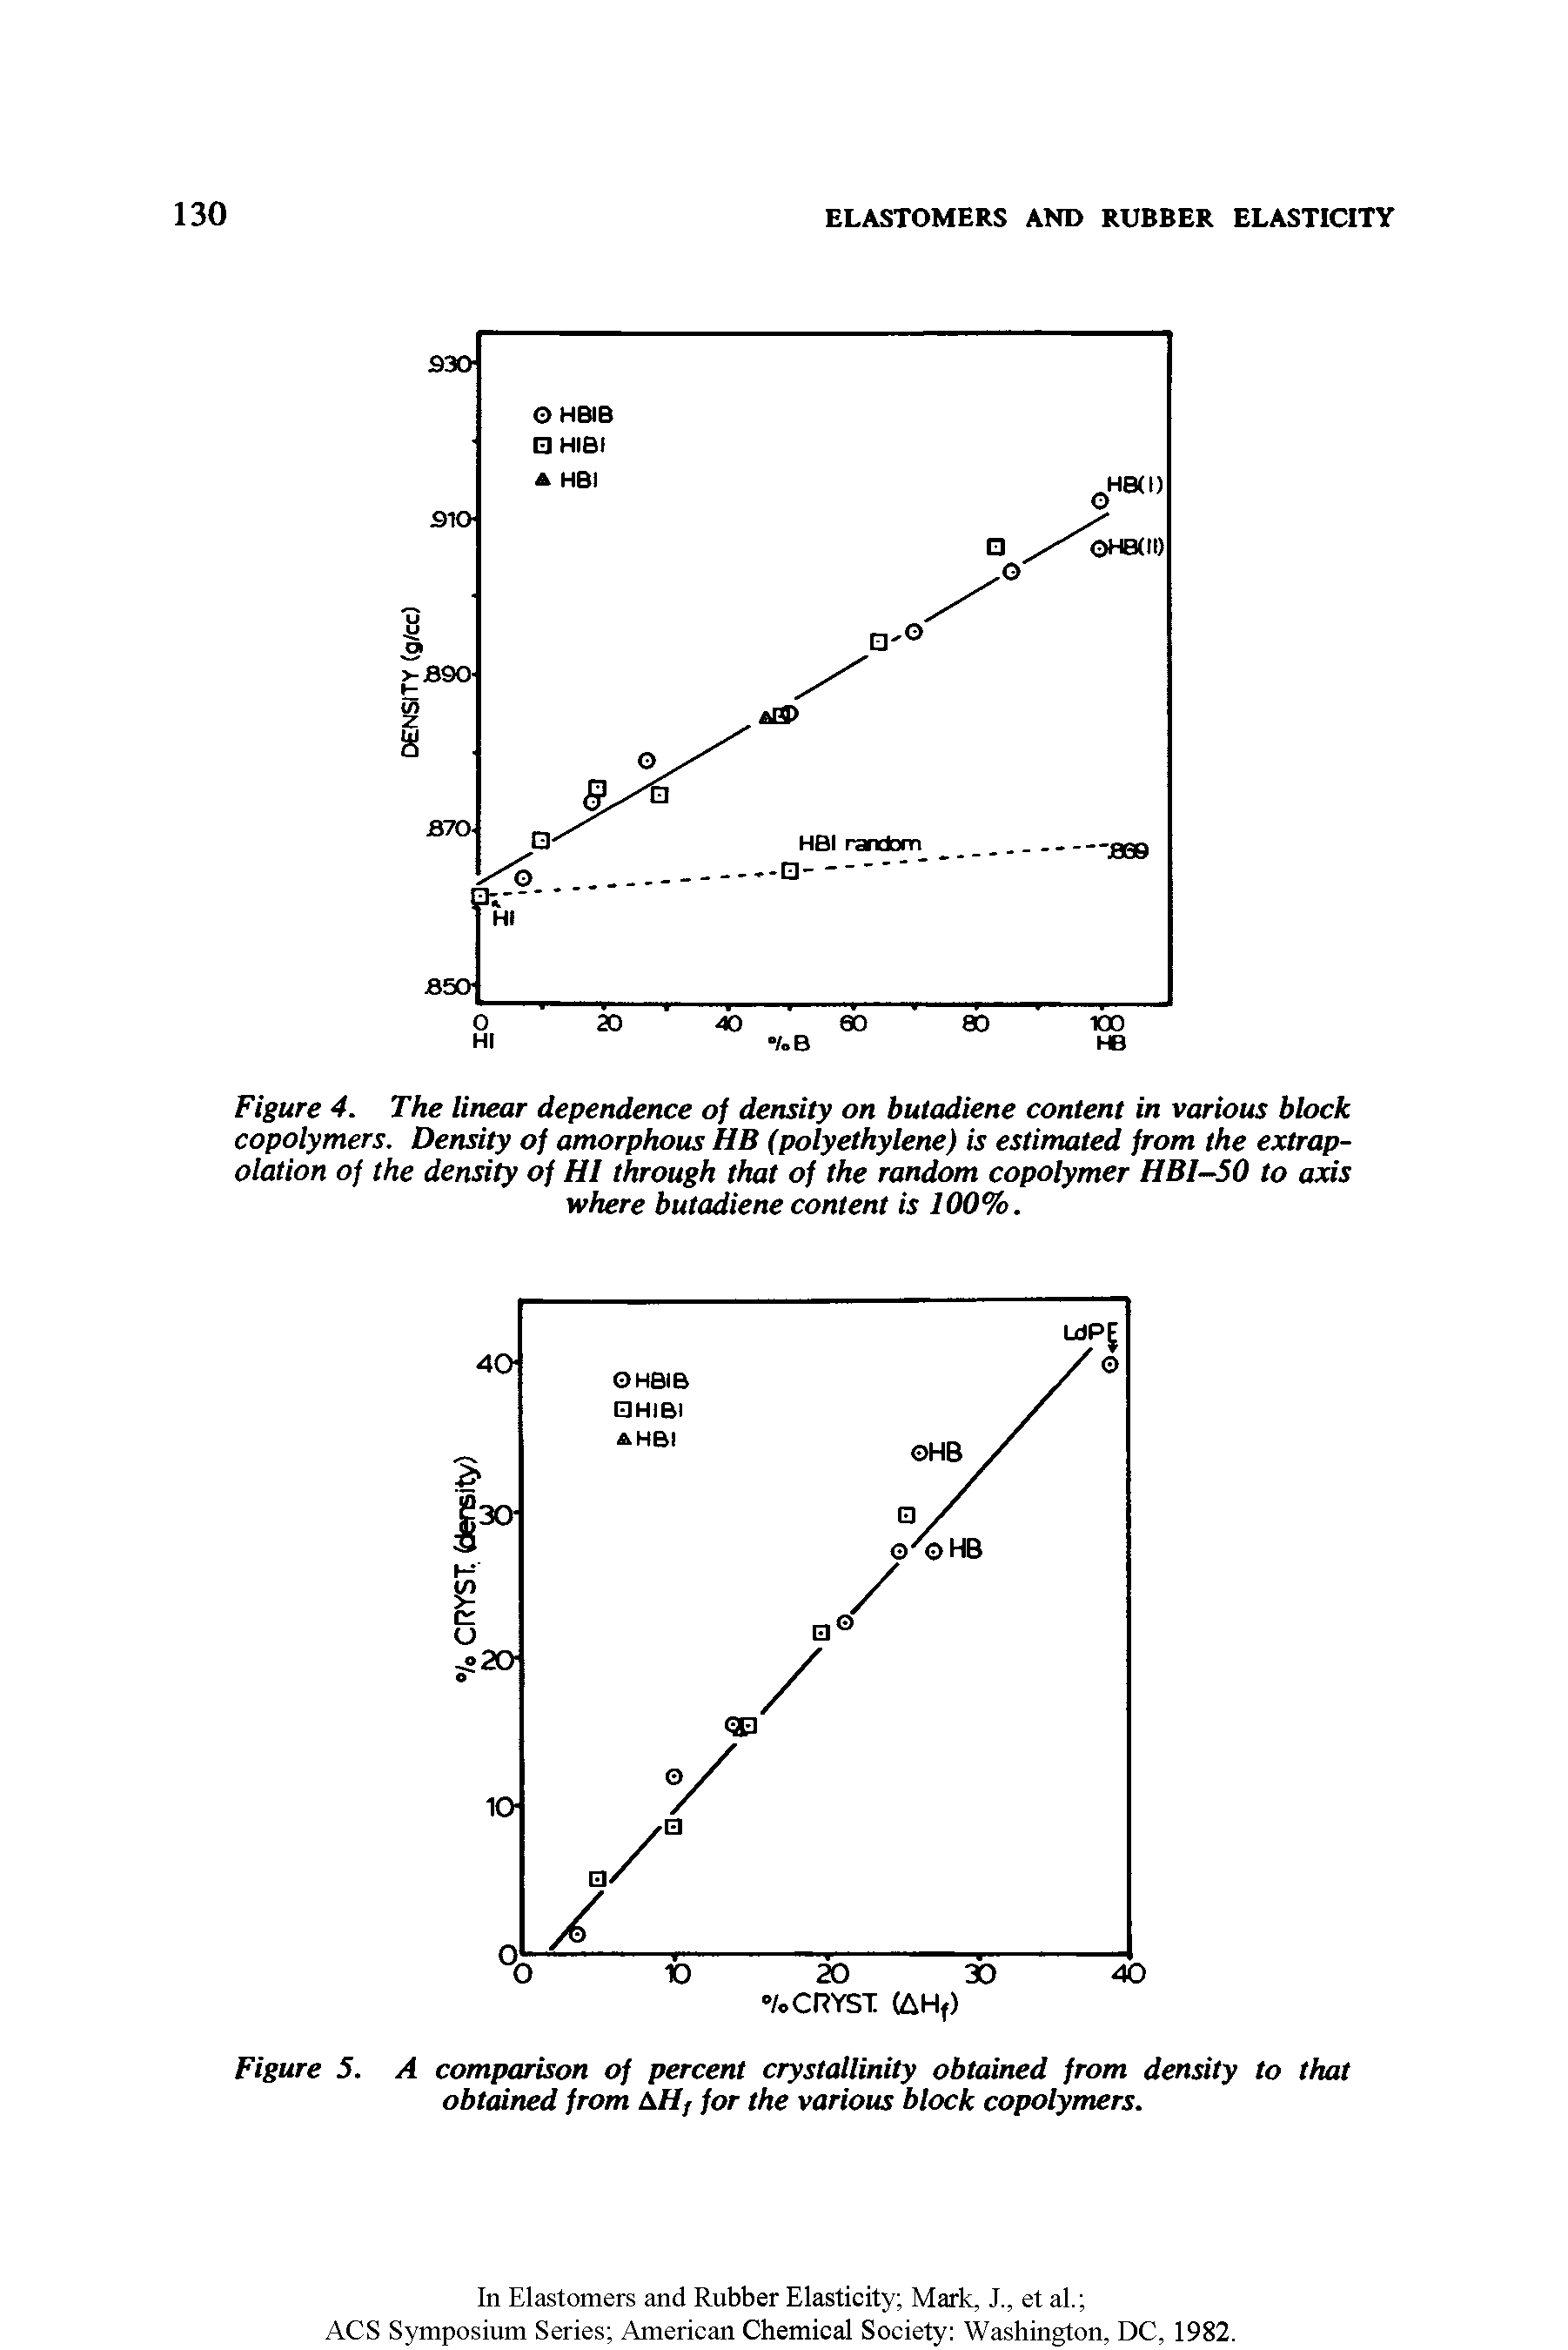 Figure 4. The linear dependence of density on butadiene content in various block copolymers. Density of amorphous HB (polyethylene) is estimated from the extrapolation of the density of HI through that of the random copolymer HBI-50 to axis where butadiene content is 100%.